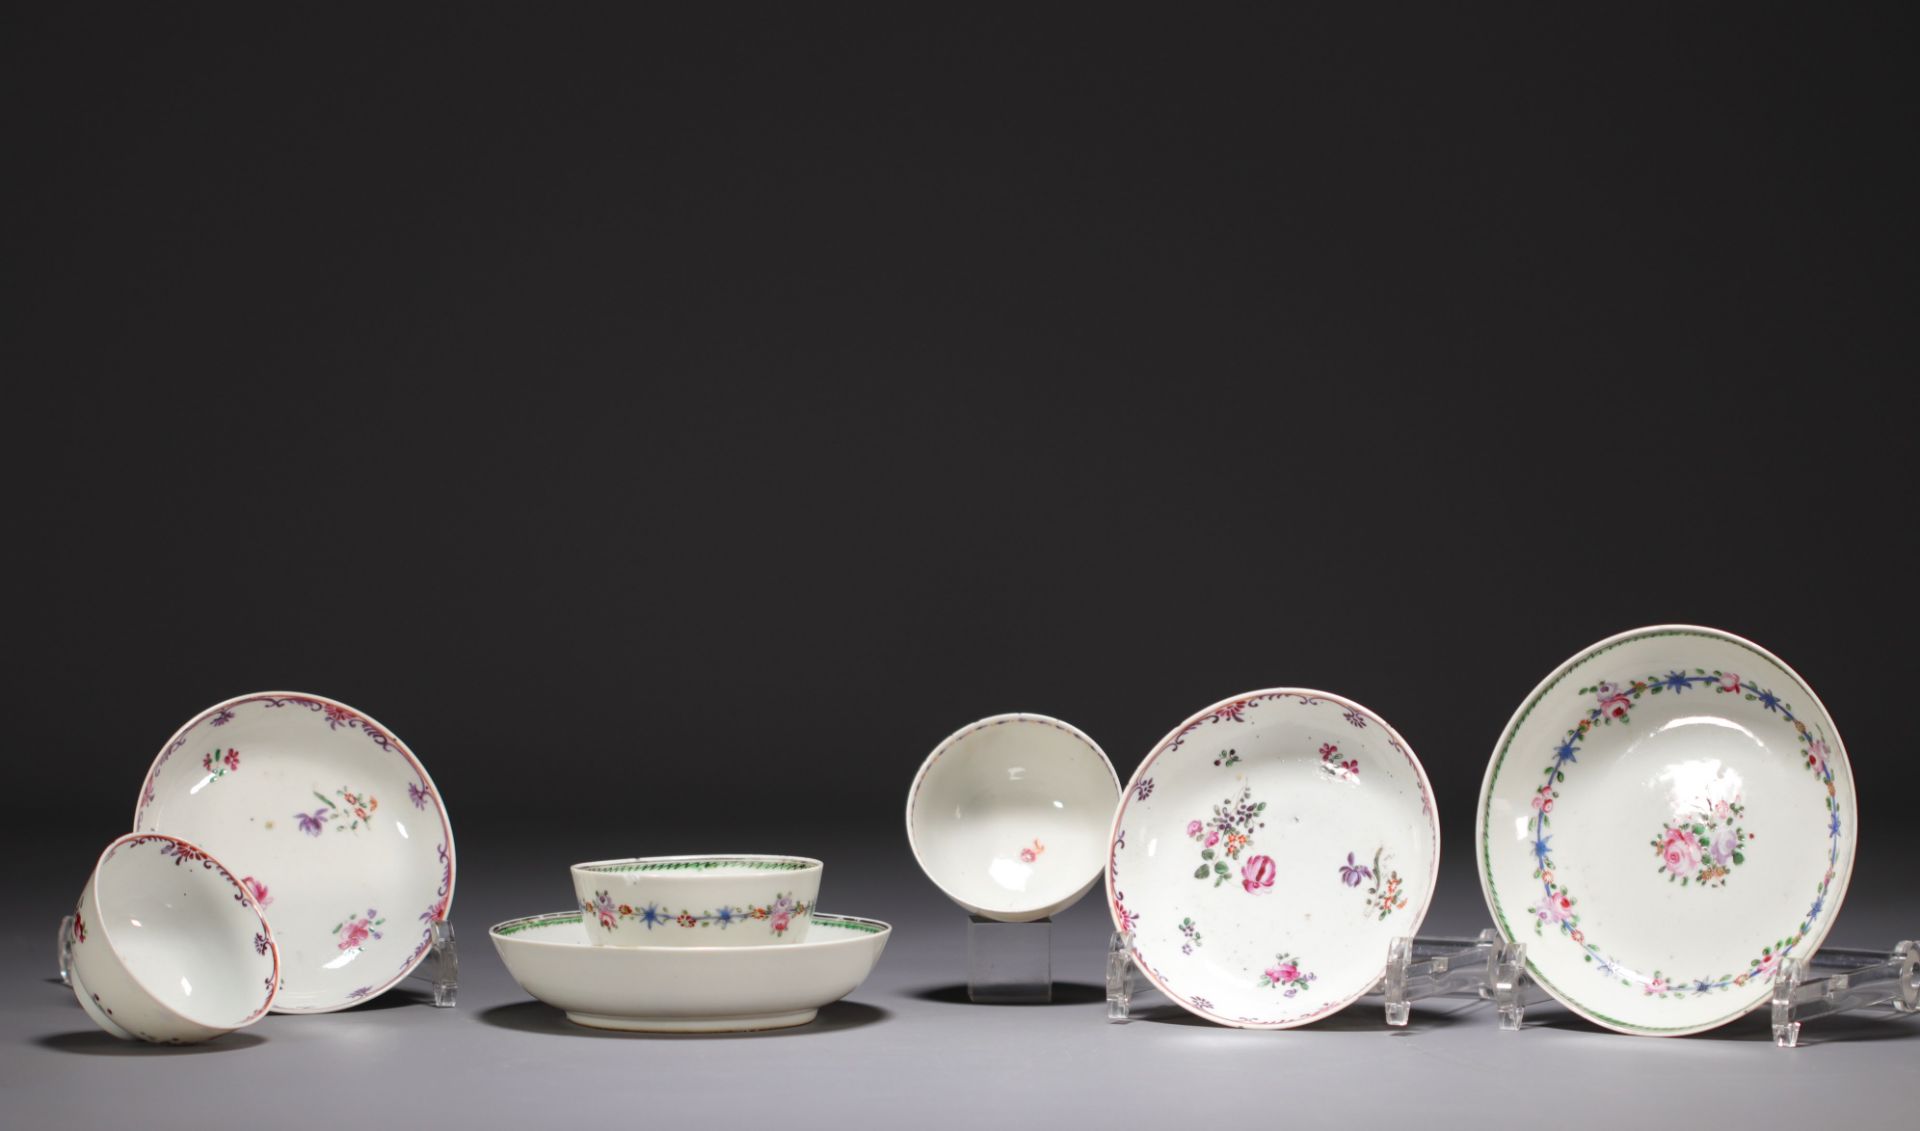 China - Set of Famille Rose porcelain bowls and saucers. - Image 2 of 3